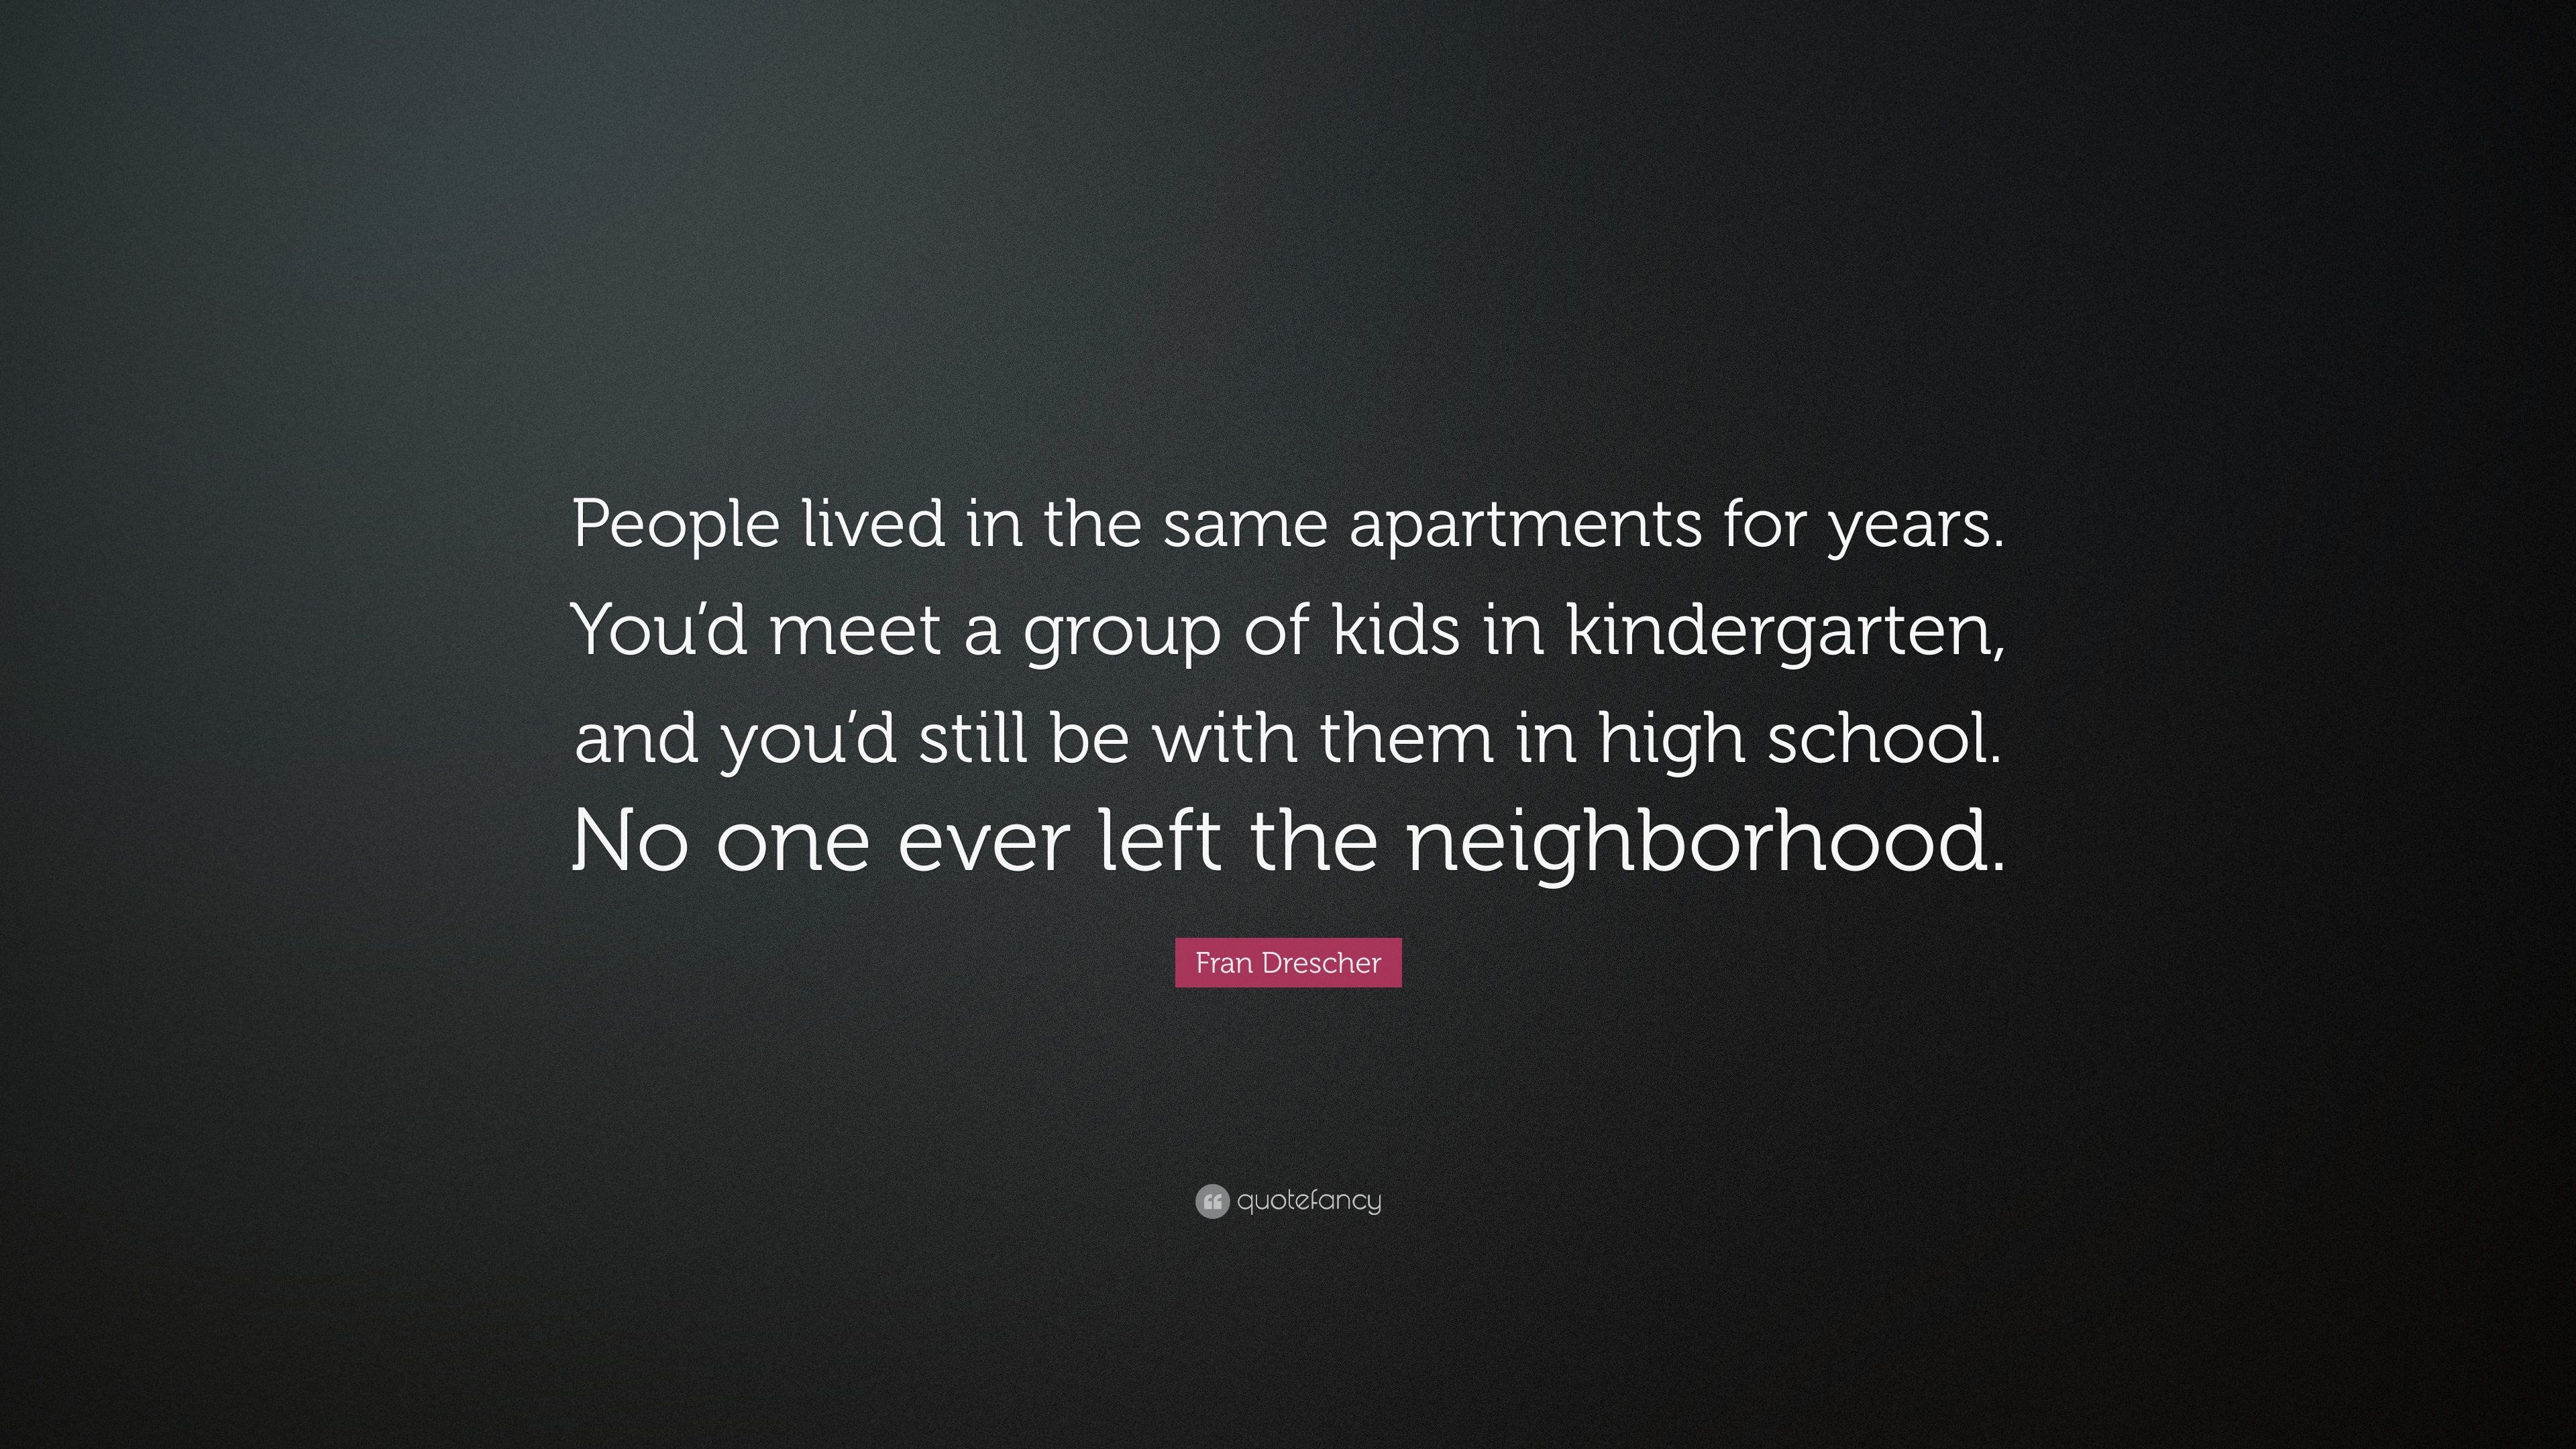 Fran Drescher Quote: “People lived in the same apartments